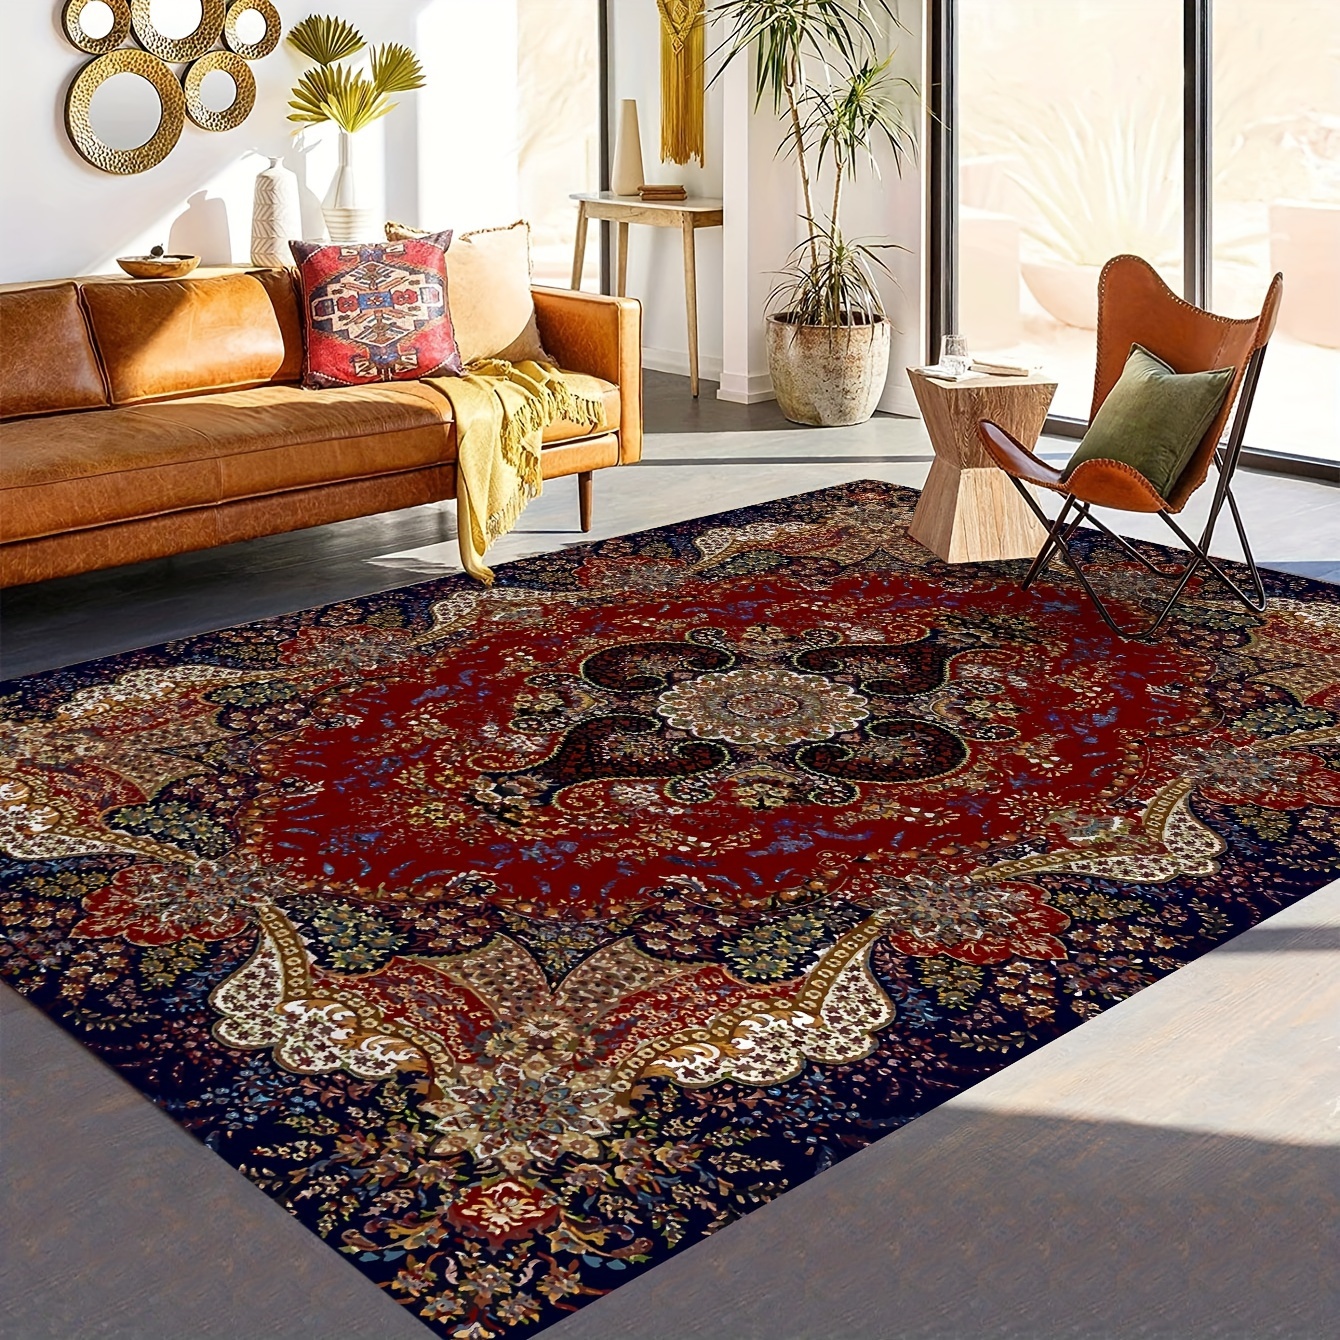 1pc Bohemian Small Entryway Area Rug, Non Slip Entry Rugs For Inside House,  Geomatric Tribal Doormat Indoor Entrance Throw Rugs Washable For Bedroom E